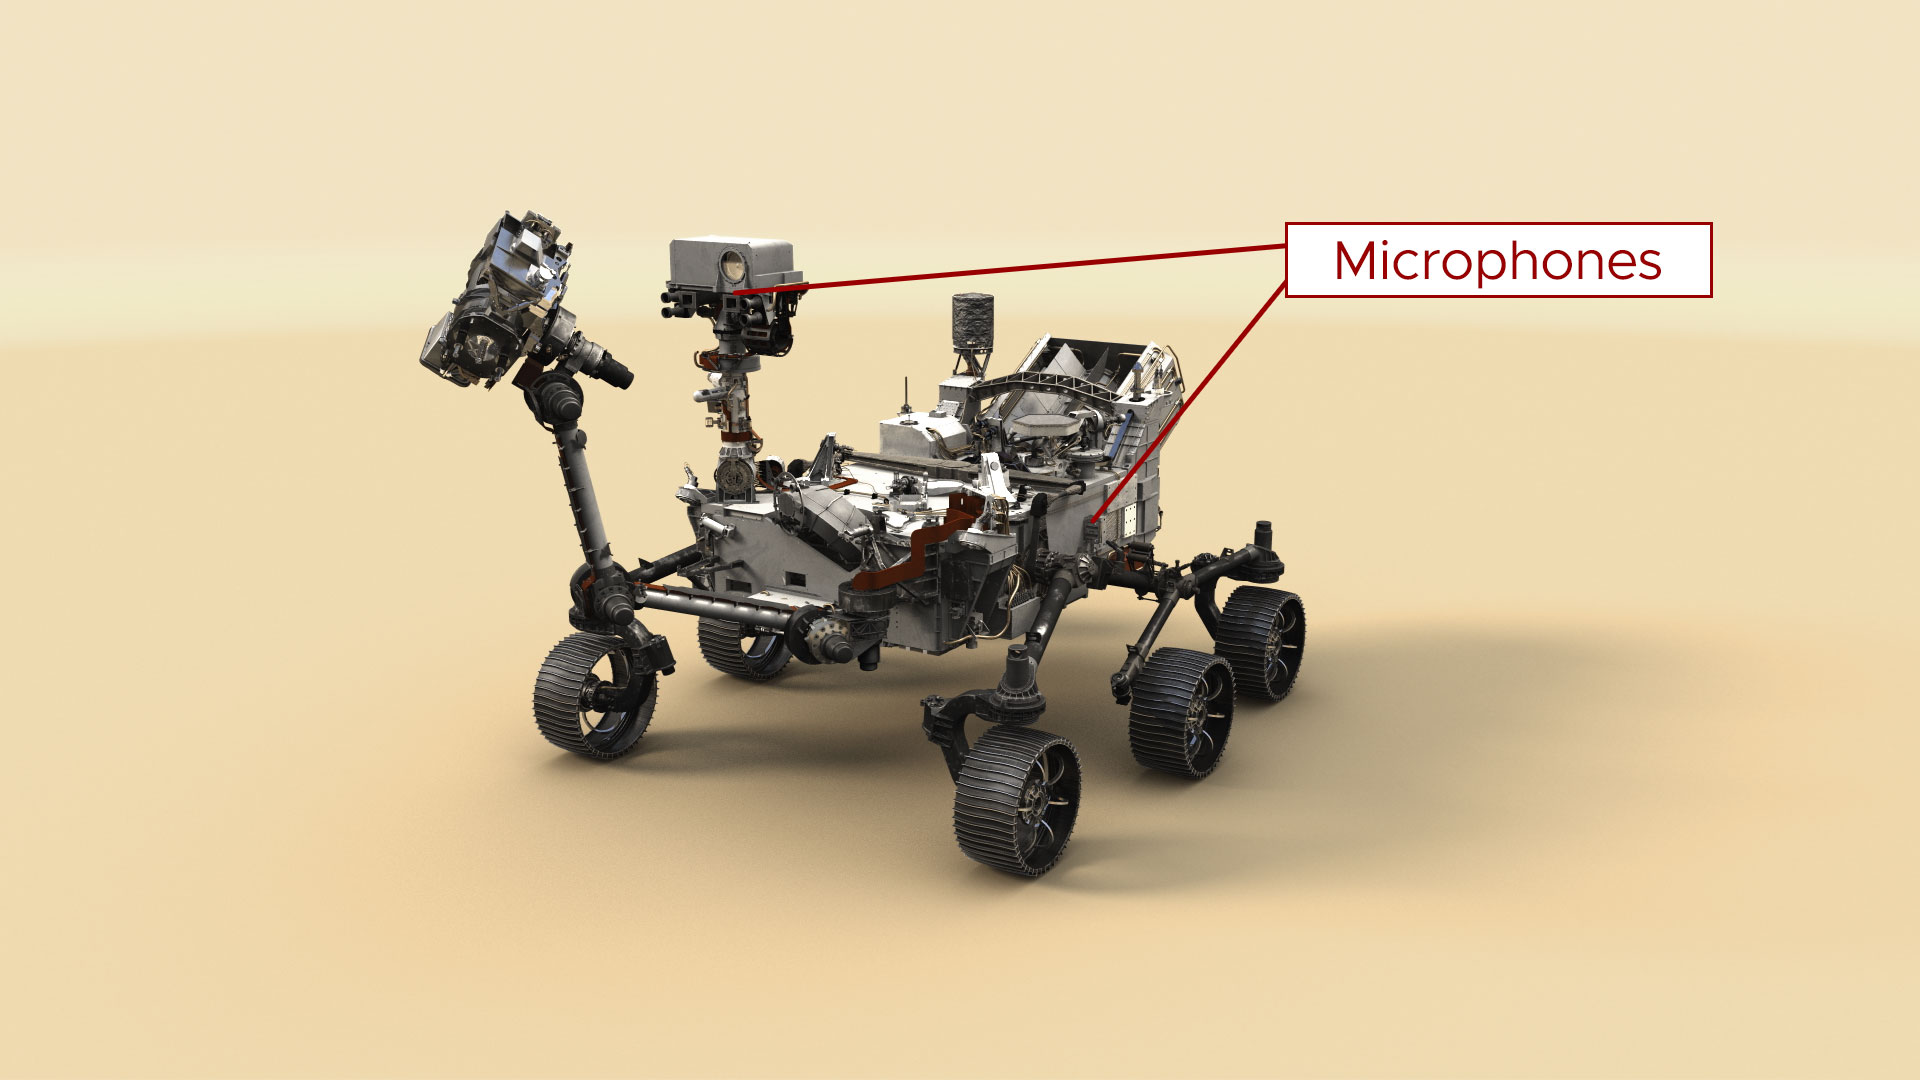 Illustration of NASA’s Perseverance Mars rover indicates the placement of the spacecraft’s two microphones